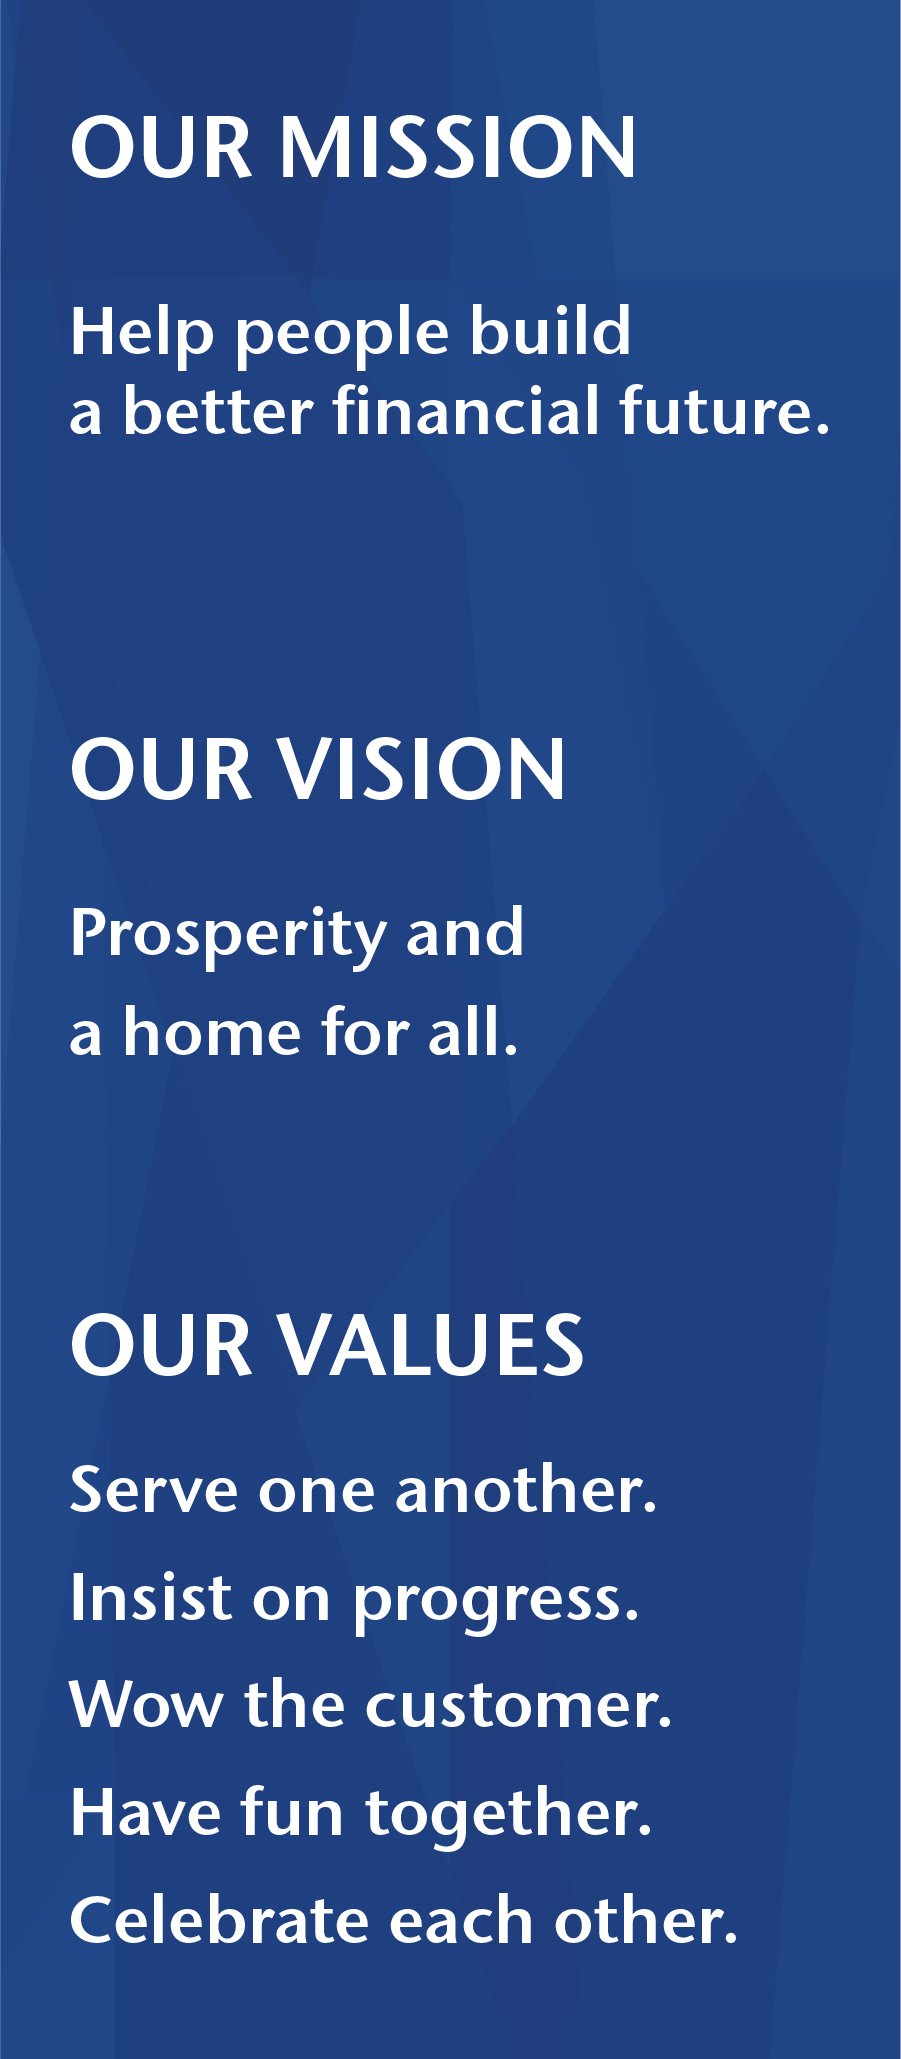 Mission Vision and Values of First Federal Bank of Kansas City